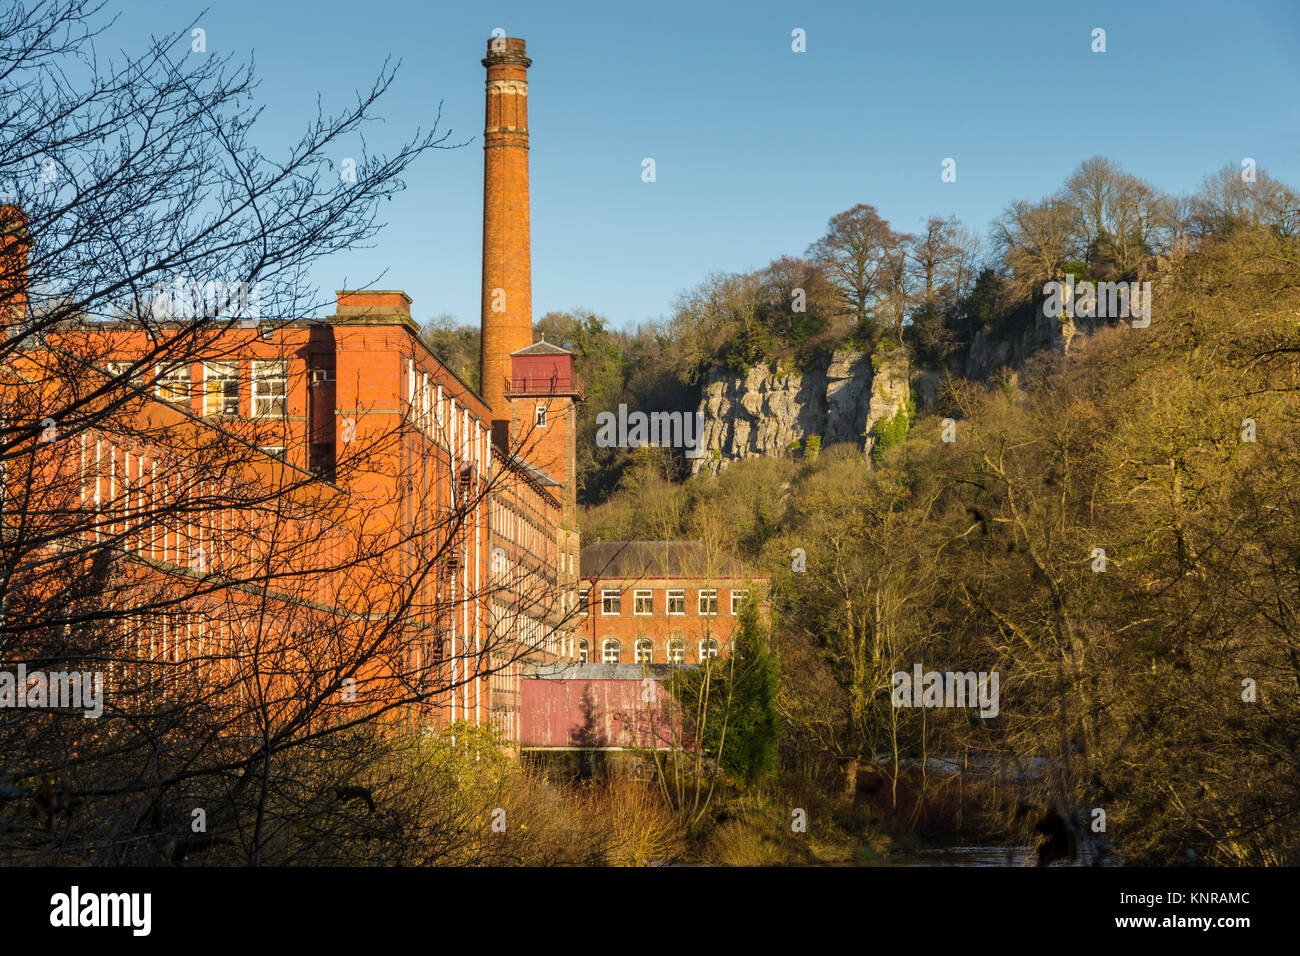 Masson Mill, former cotton mill by Sir Richard Arkwright 1783-84.  Now retail outlet and museum. Matlock Bath, Peak District, Derbyshire, England, UK Stock Photo